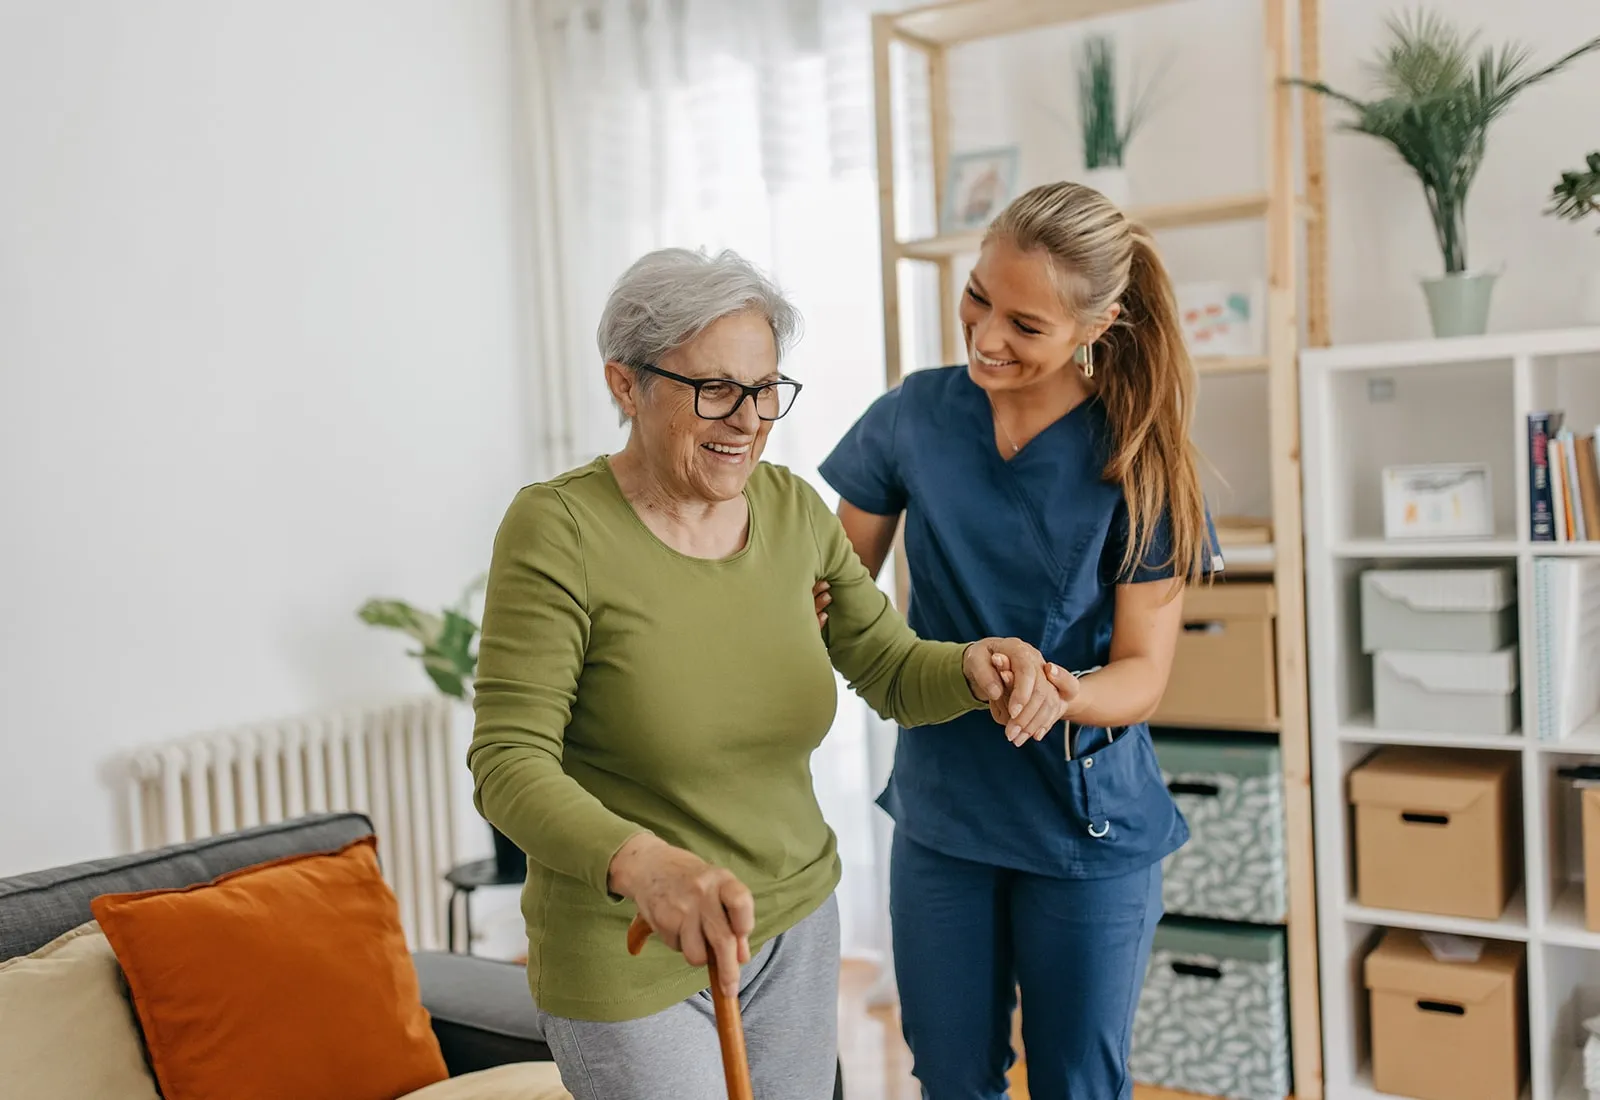 Home Safety Tips for Seniors - caregiver walking with elderly woman in her home